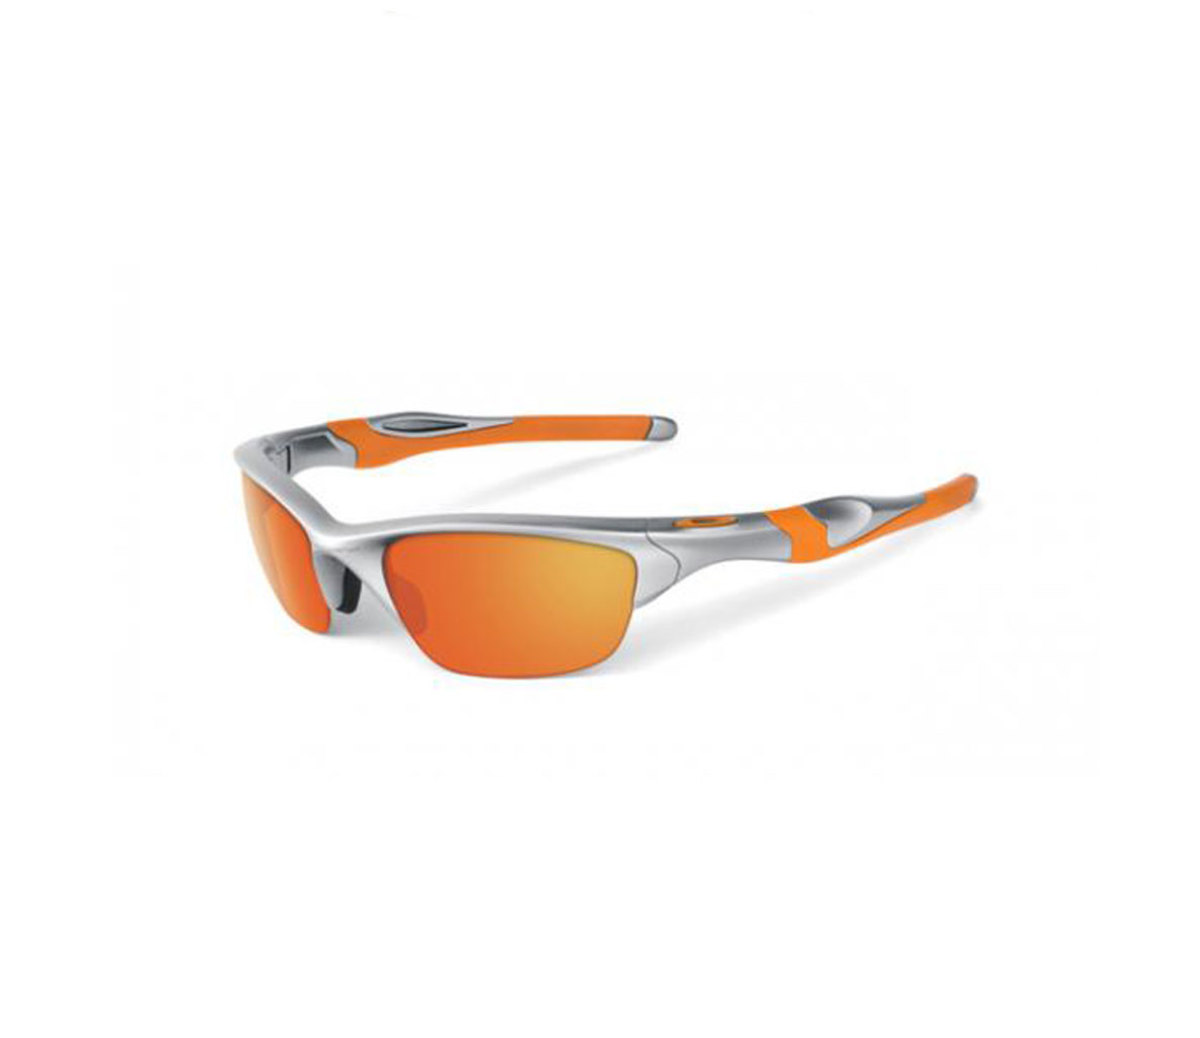 The Best High-Performance Coaching Sunglasses and More - Men's Journal